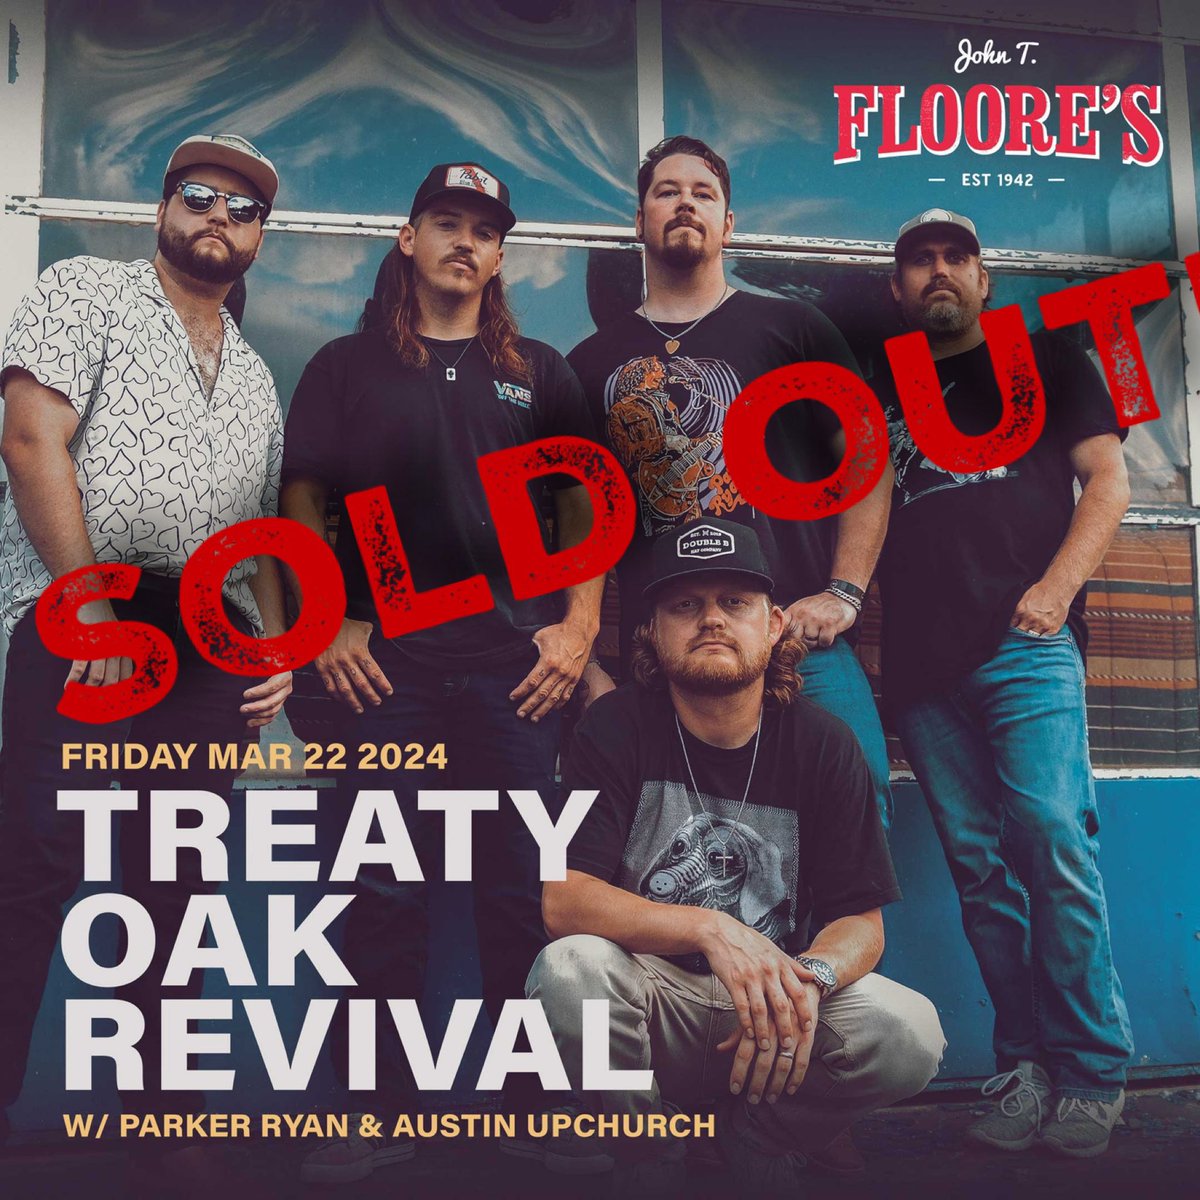 If you’ve got tickets to tonight’s sold out @TreatyOakMusic show on the outdoor stage at Floore’s with special guests @ParkerRyanMusic and Austin Upchurch - Gates open at 7pm and music starts at 7:30pm!